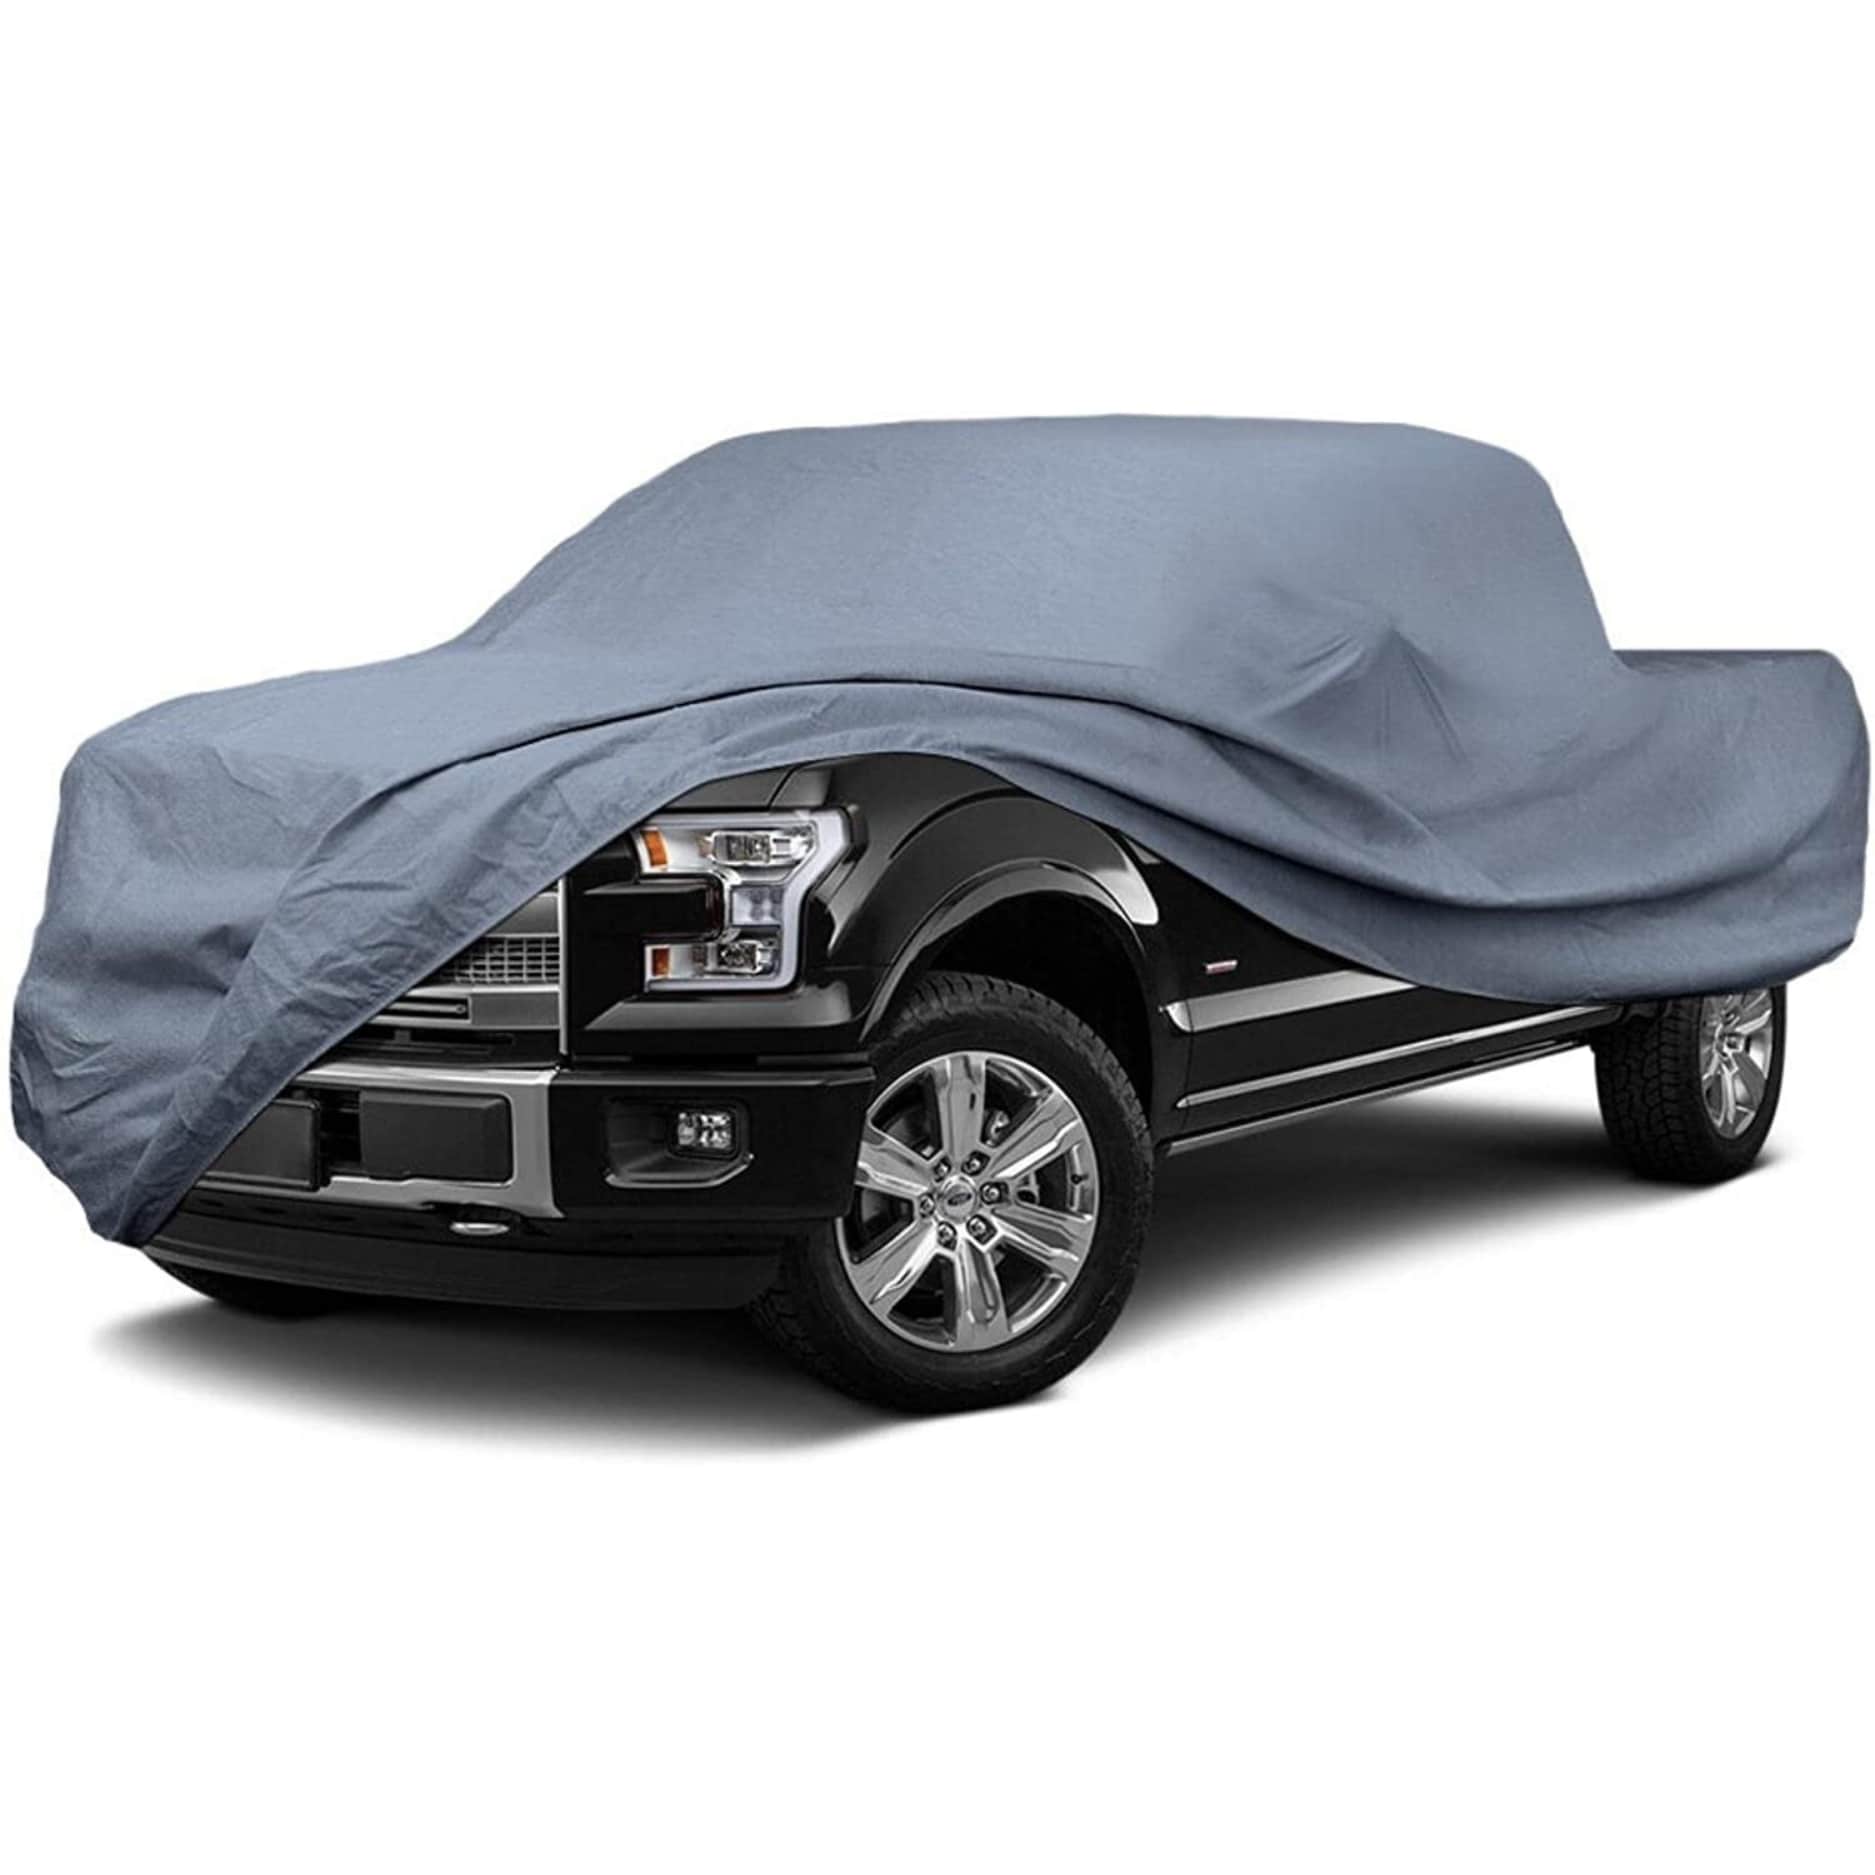 Indoor/Outdoor cover Car Covers at